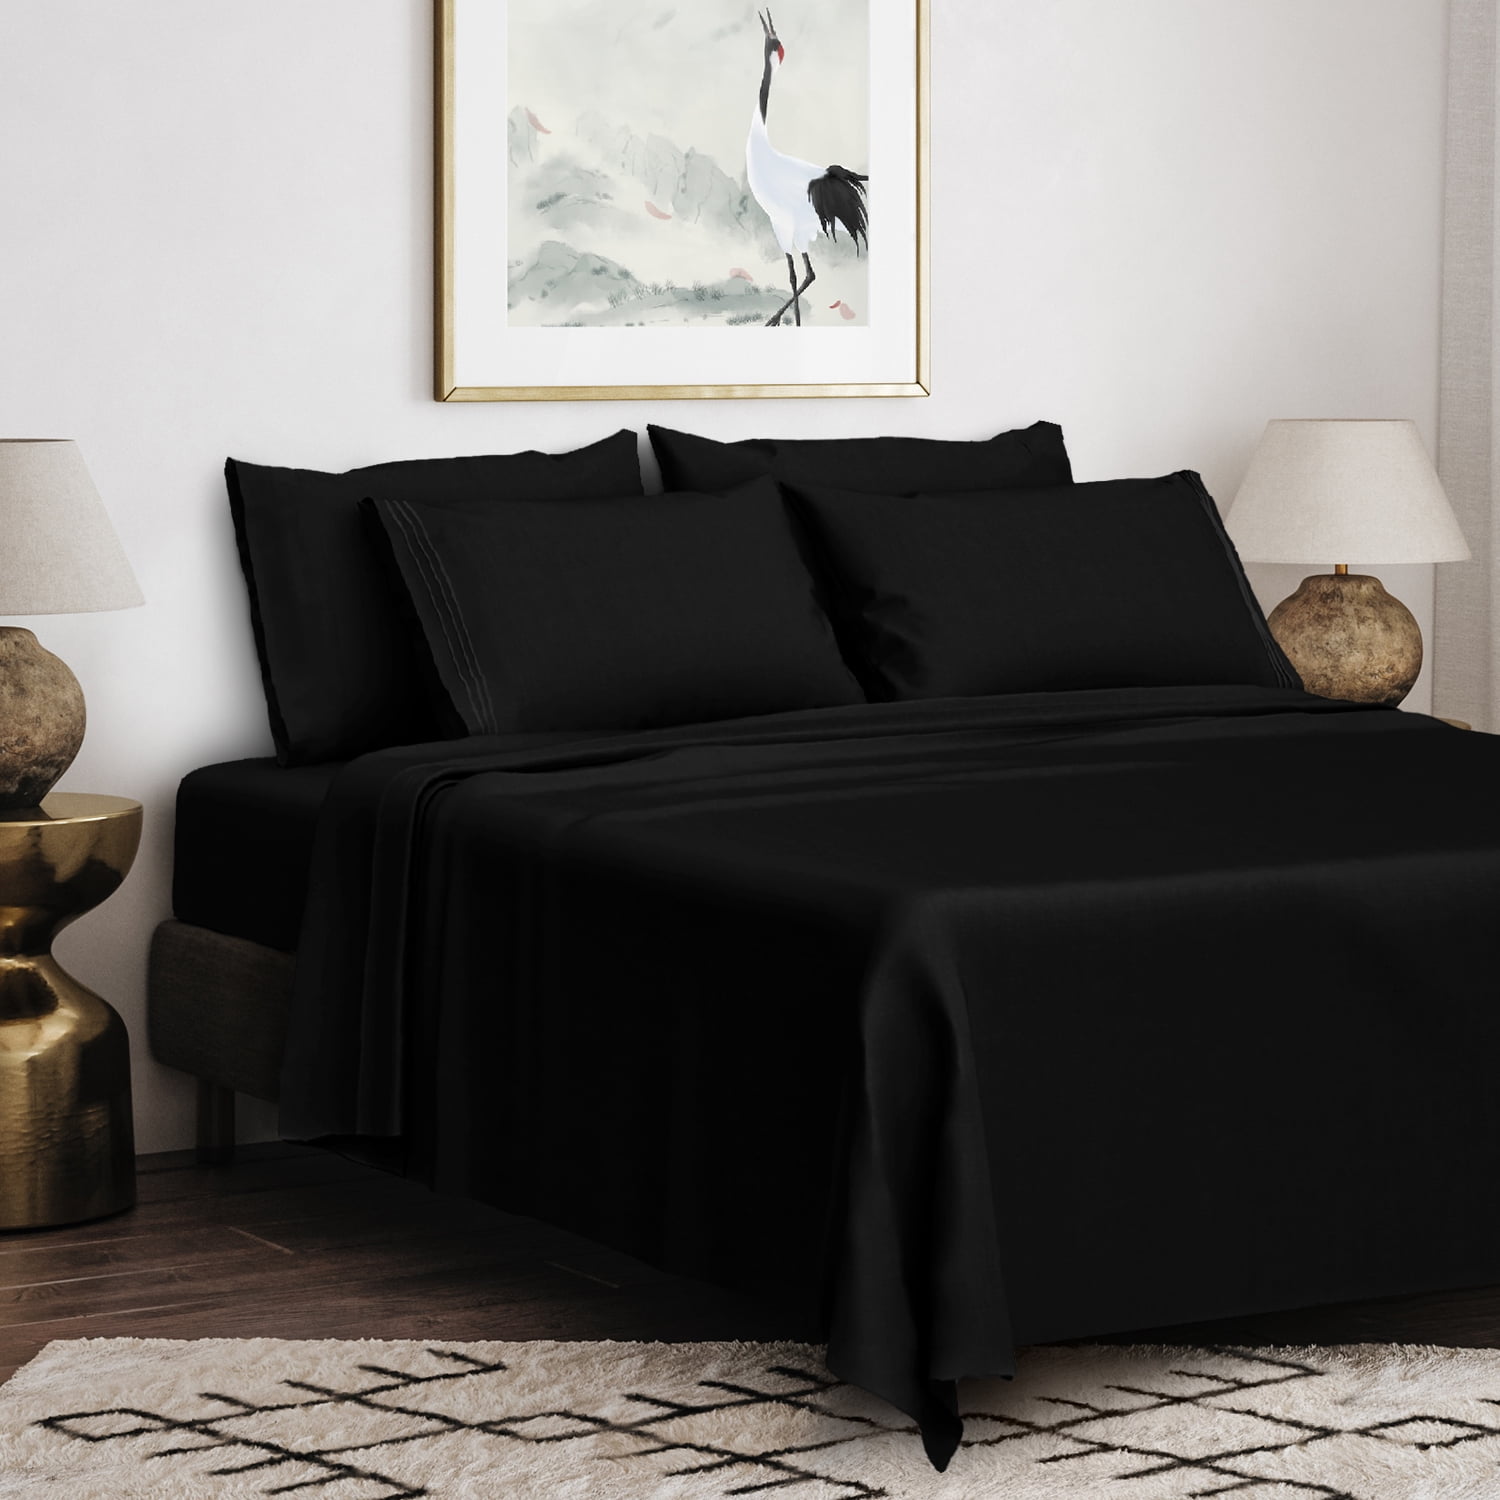 Utopia Bedding Full Bed Sheets Set - 4 Piece Bedding - Brushed Microfiber - Shrinkage and Fade Resistant - Easy Care (Full, Black)